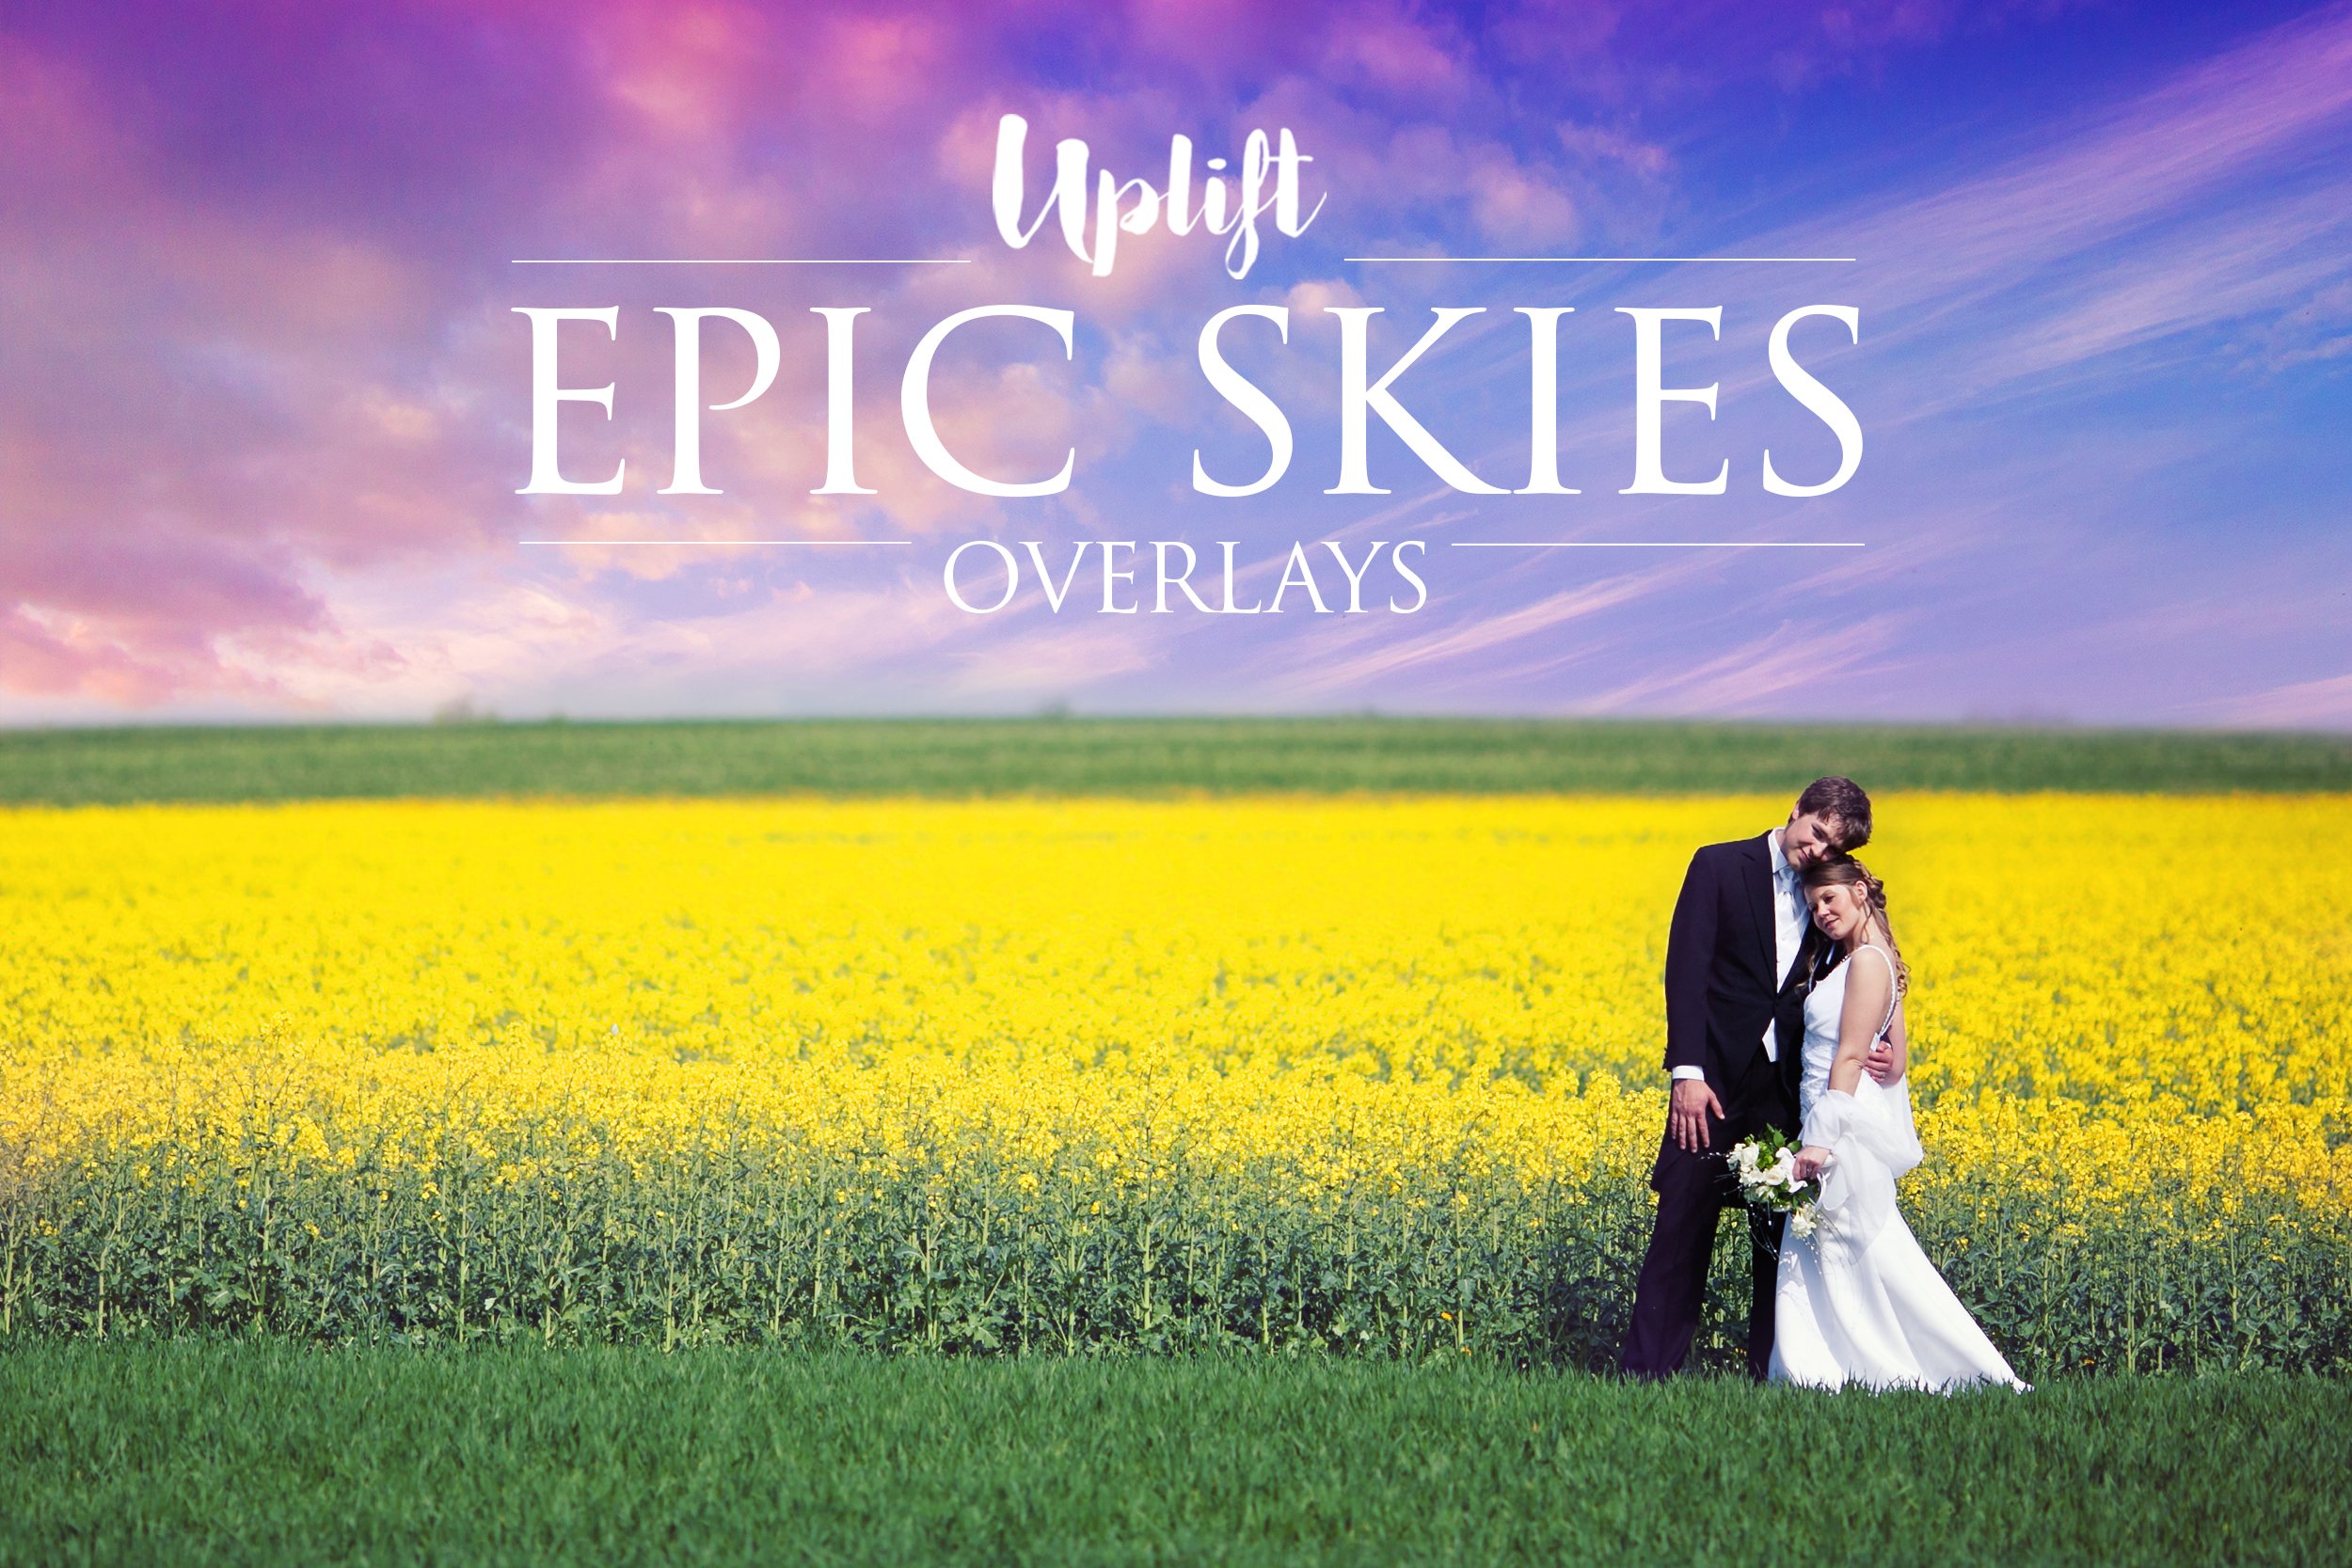 uplift epic skies cover 2